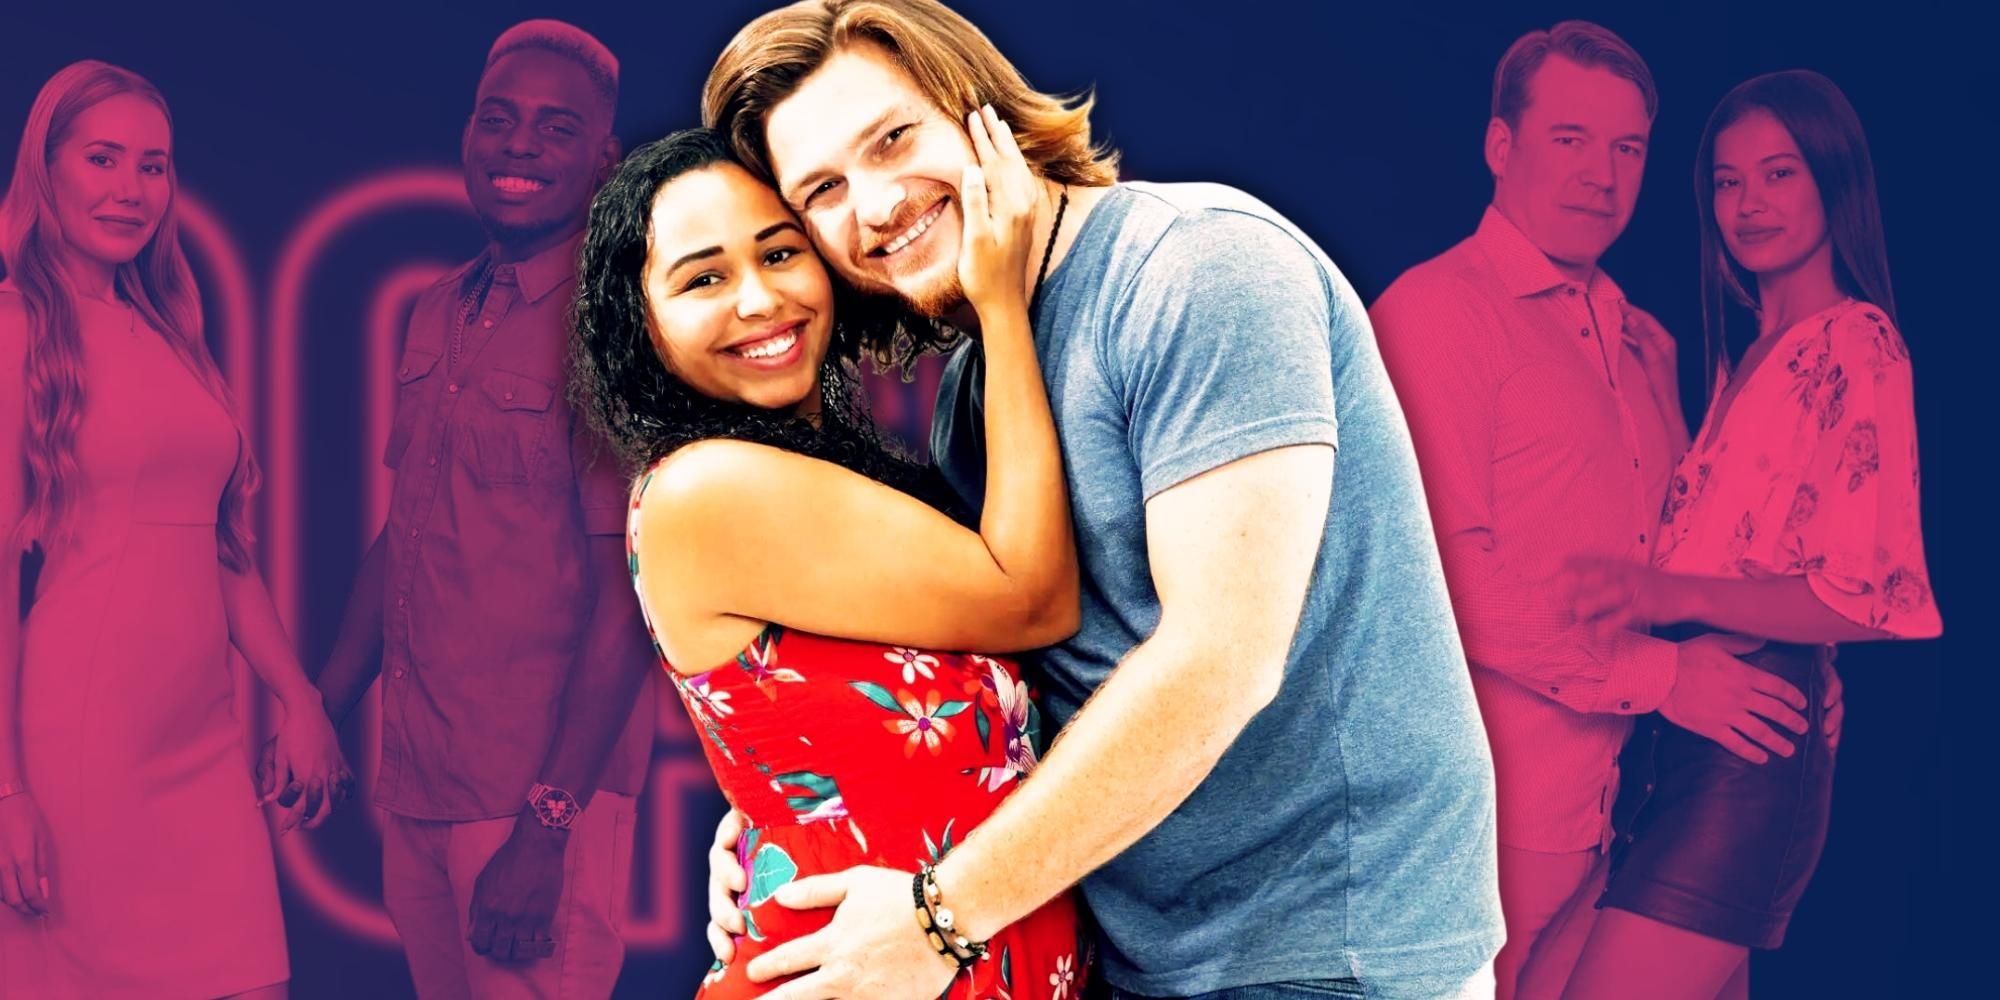 90 Day Fiancé: What Happened To The Season 7 Couples In 2021?